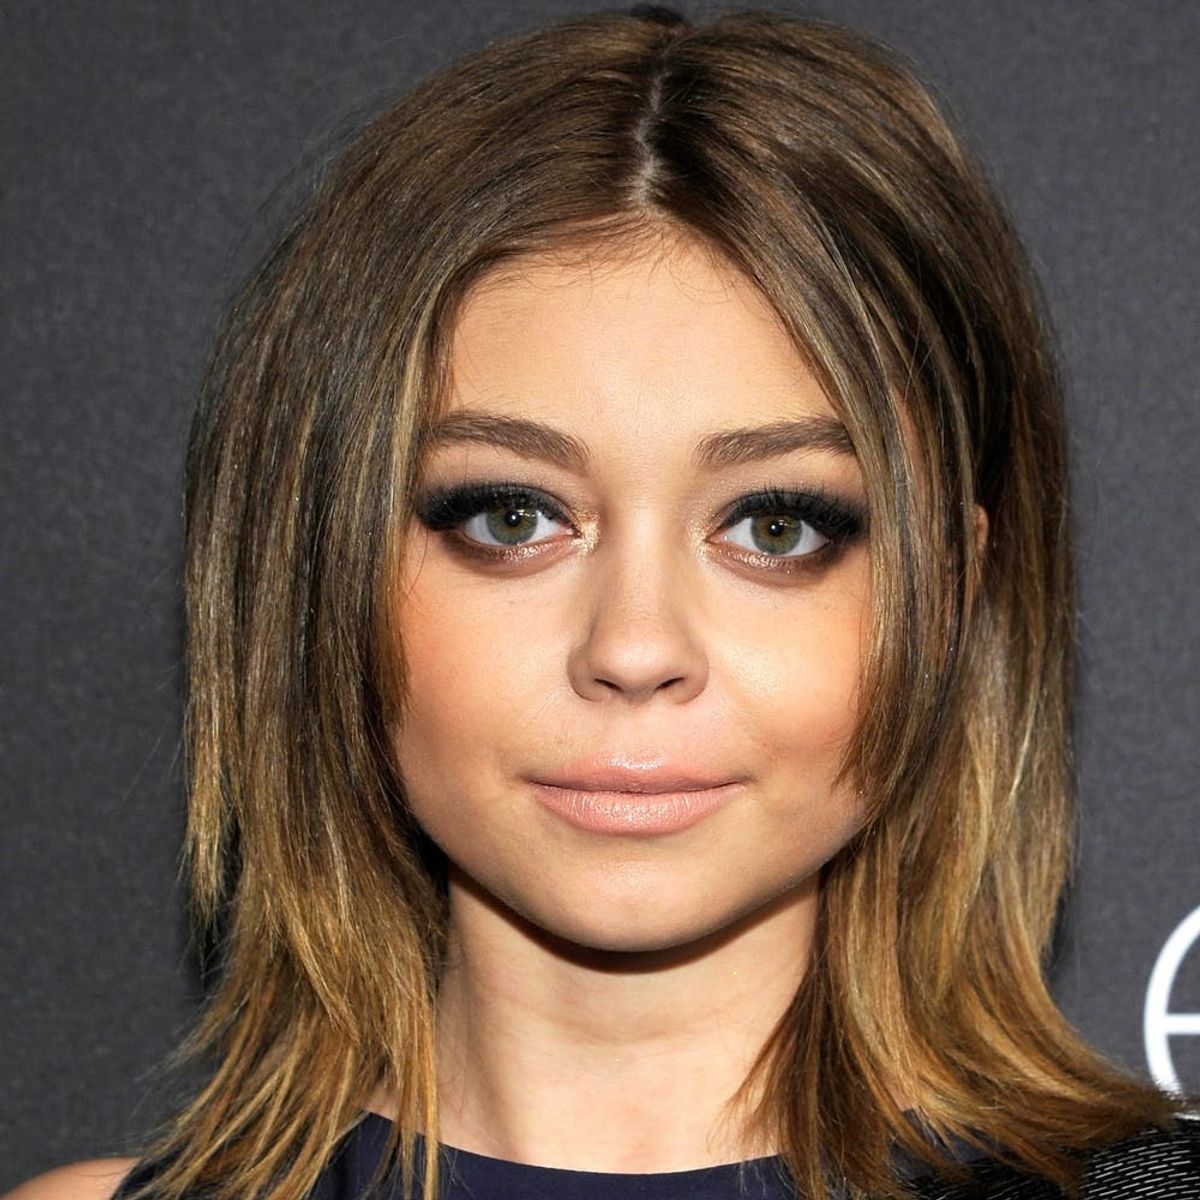 Sarah Hyland Is Nearly Unrecognizable As a Newly Blonde Bombshell